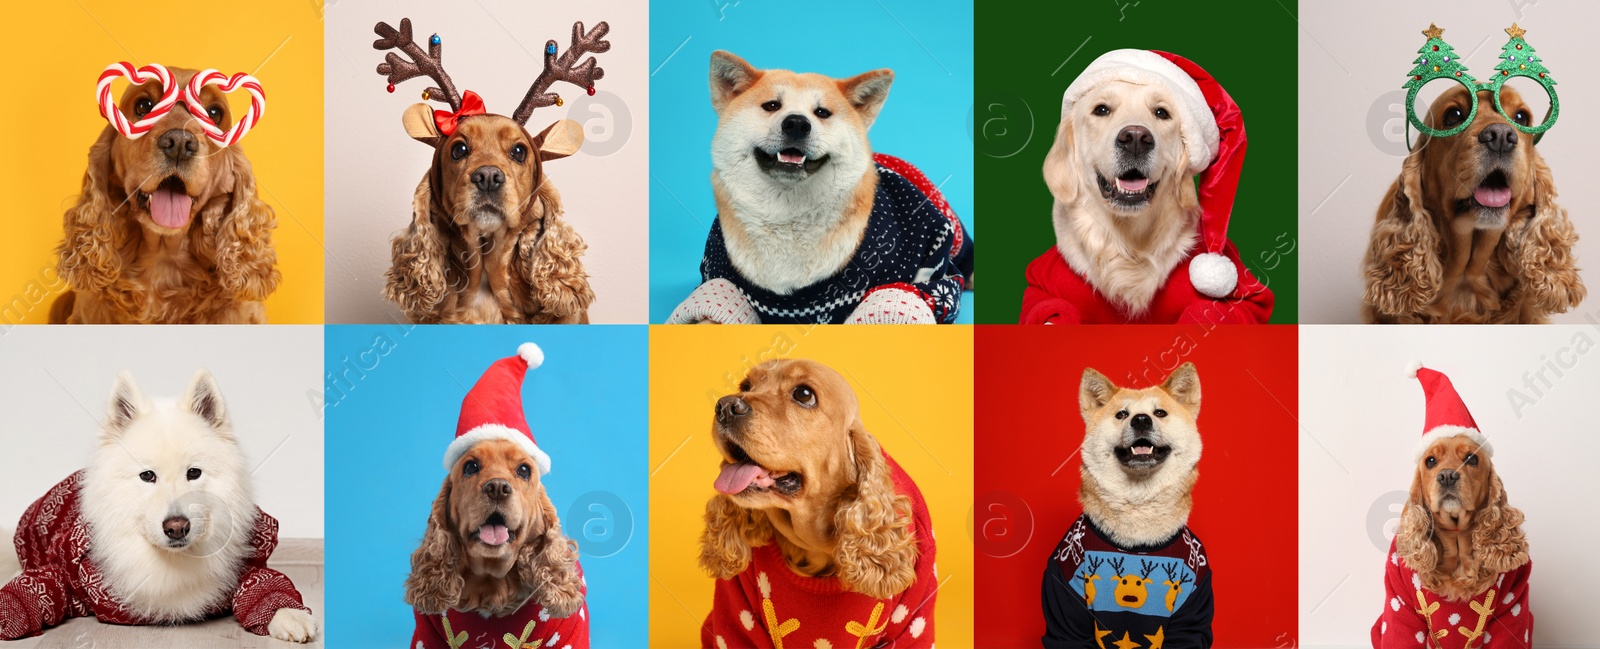 Image of Cute dogs in Christmas sweaters, party glasses, Santa hats and headband on color backgrounds. Banner design